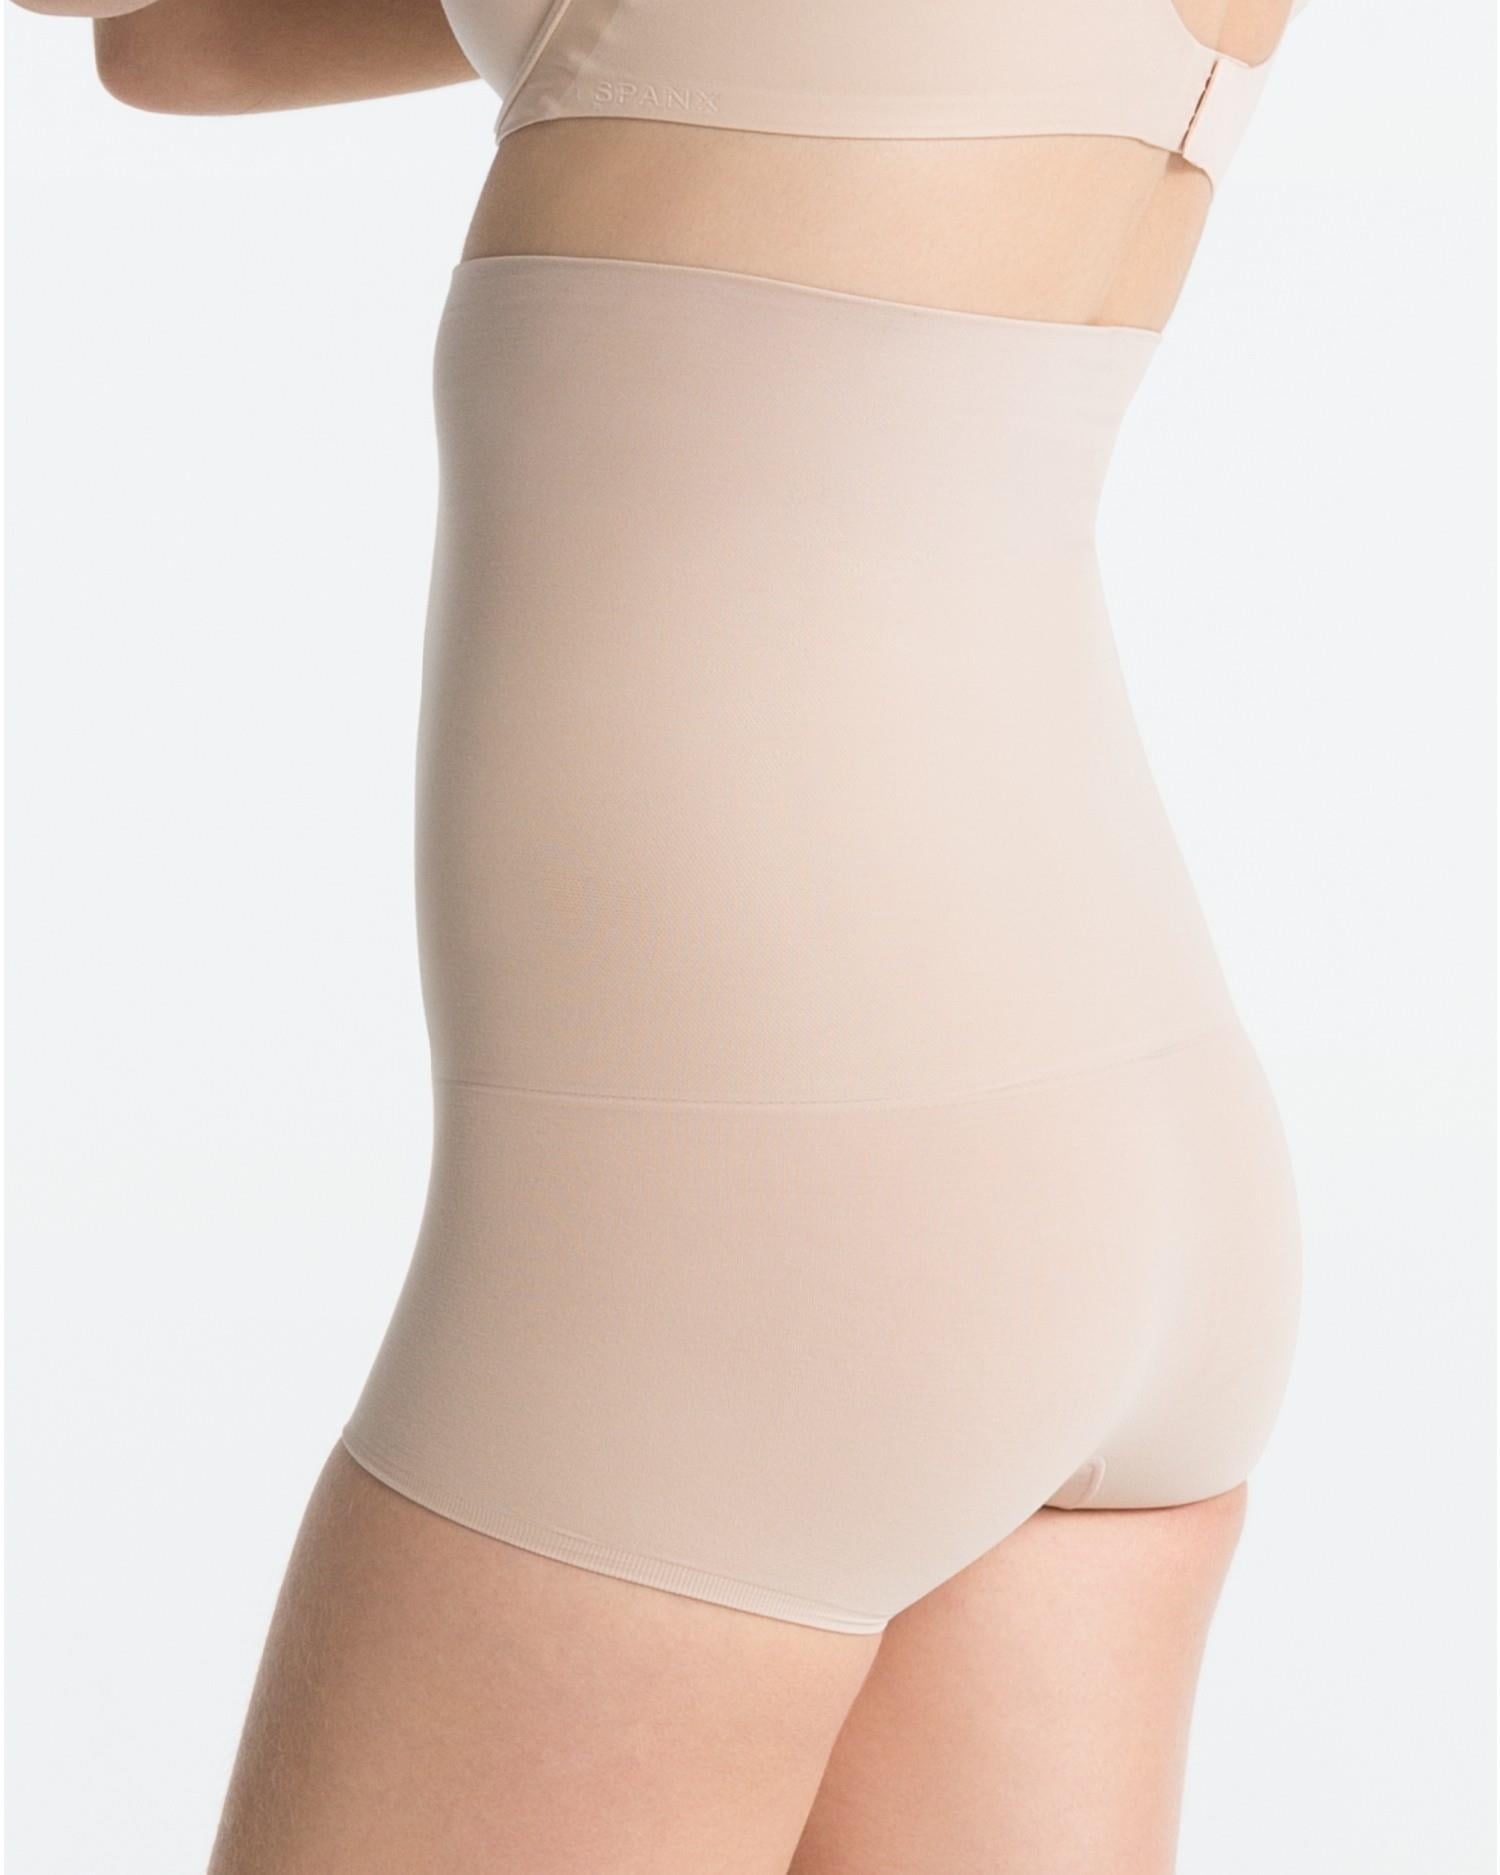 SPANX HAUTE CONTOUR HIGH WAISTED SHORTY SHAPER #2331 NUDE SIZE A NEW READ  $48